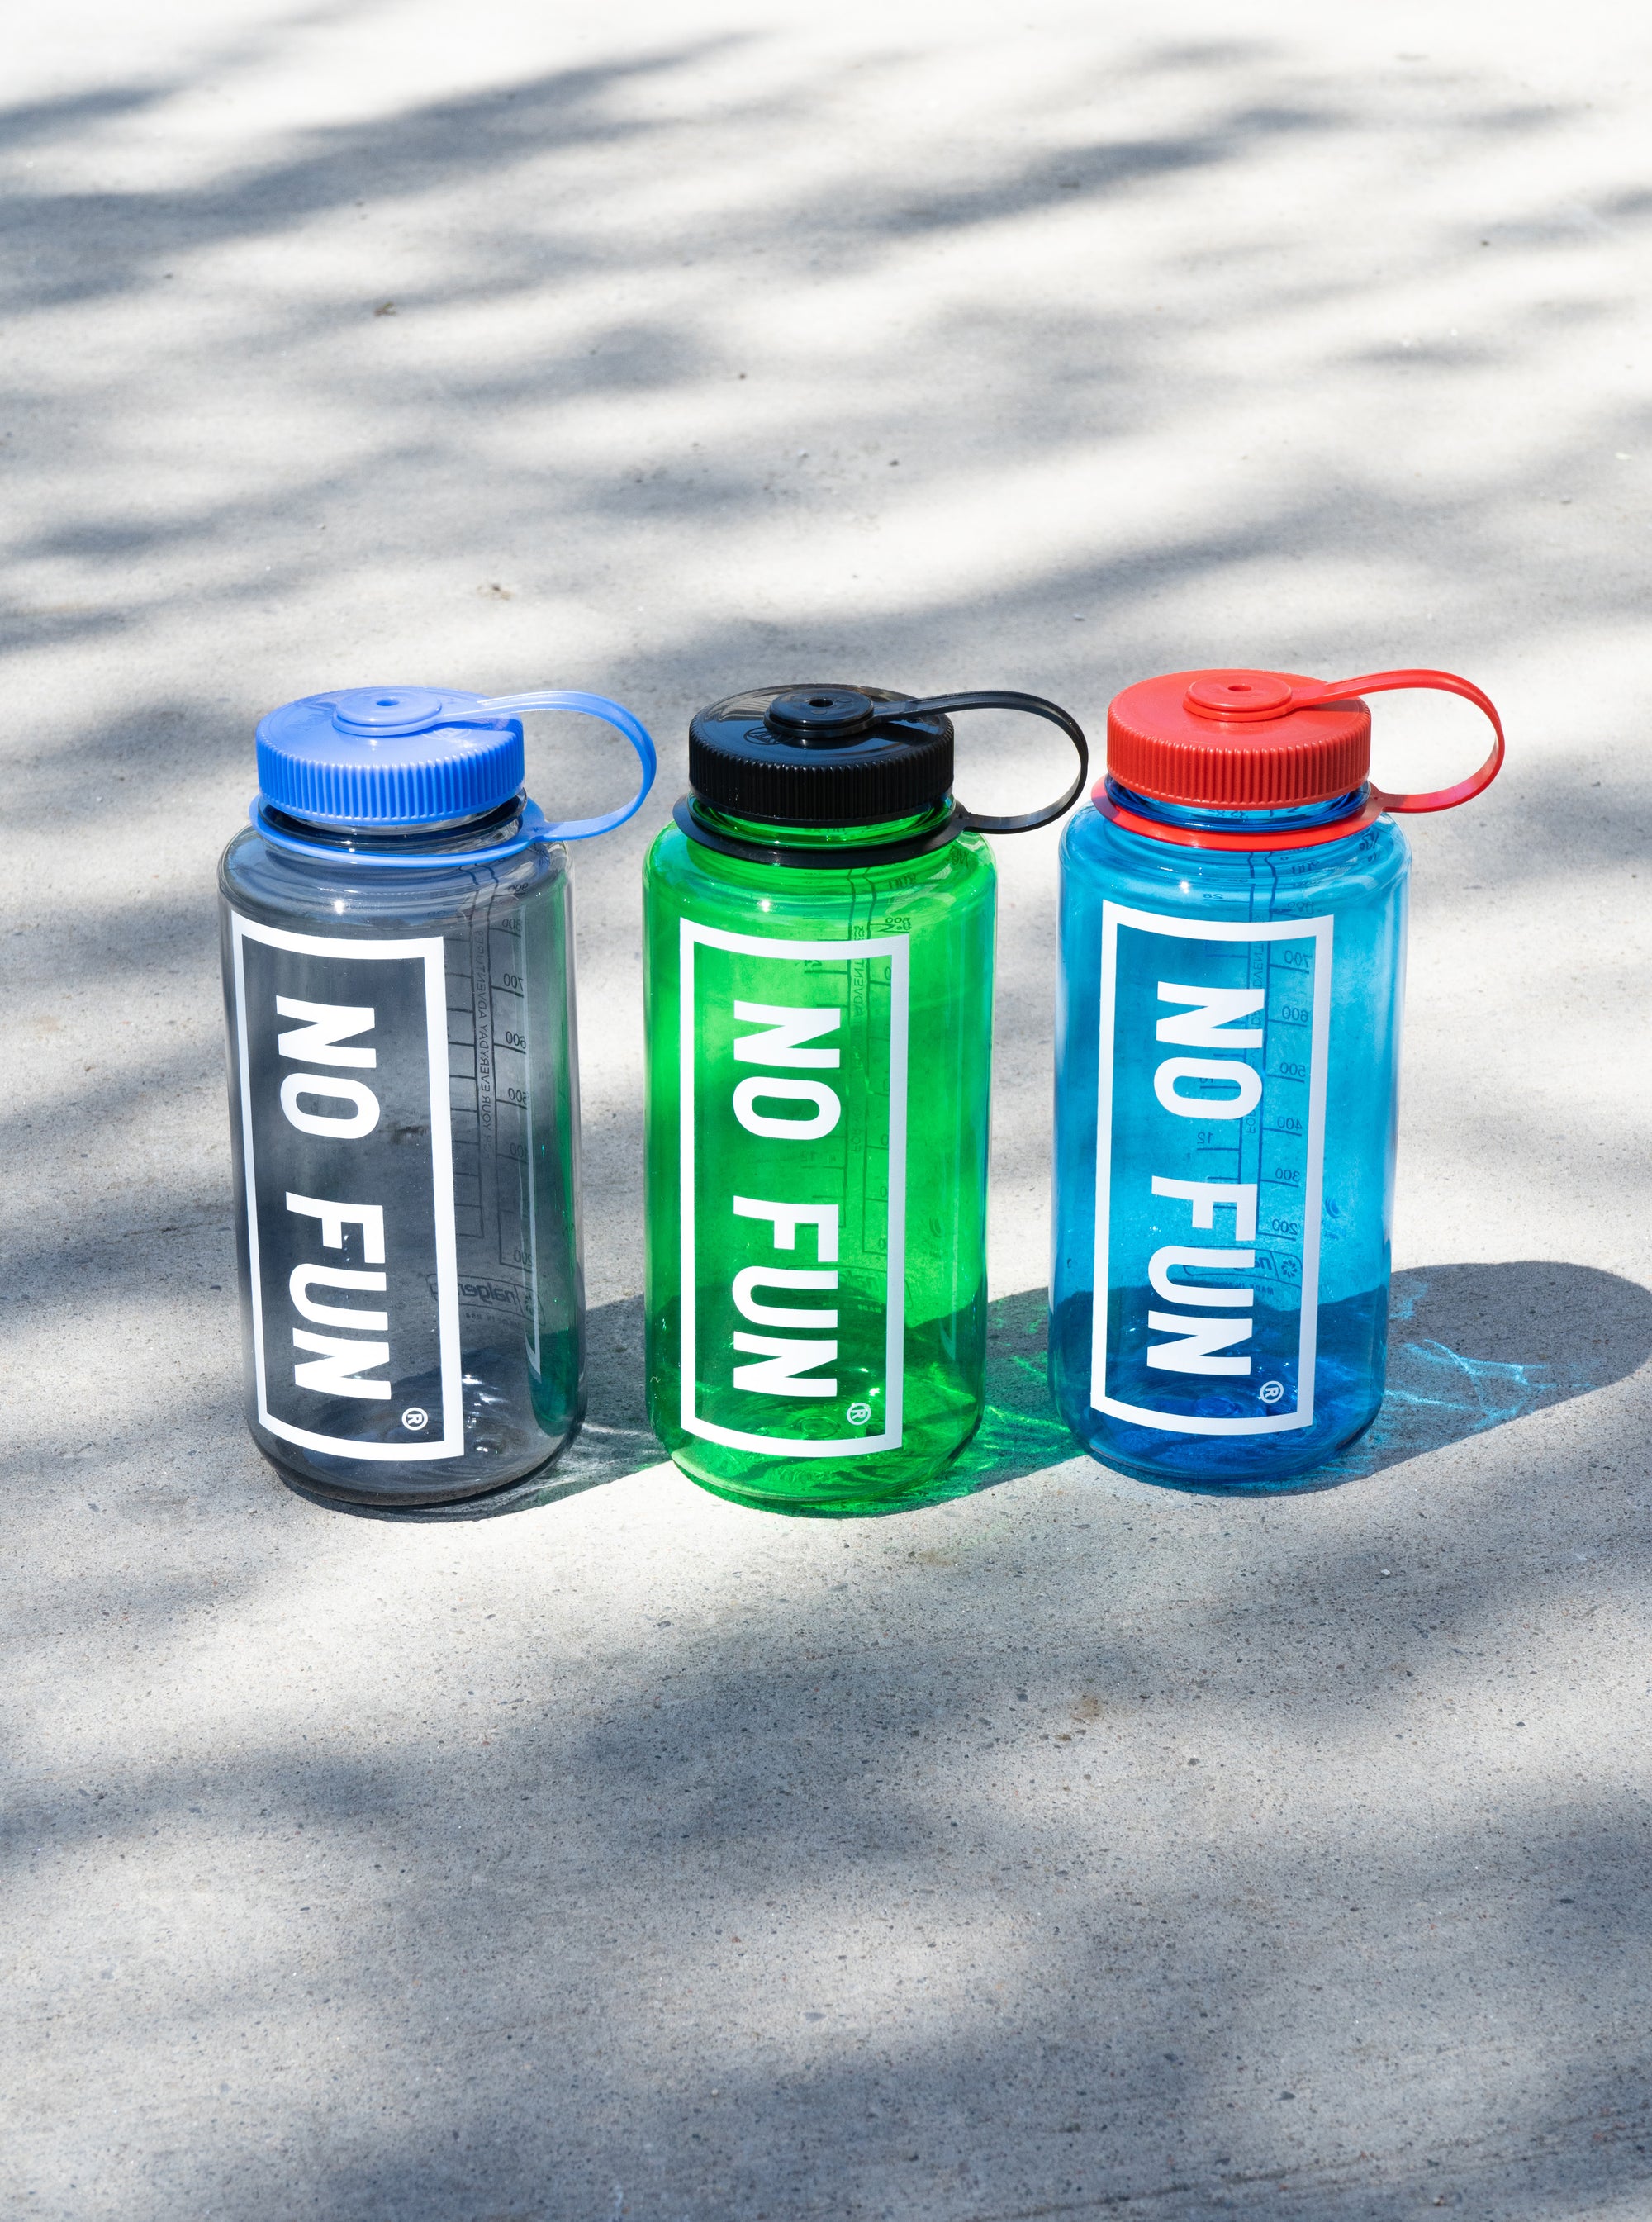 3 colours of the Nalgene® + No Fun® 32oz Bottle.  They are lined up in a row on the concrete.  Shadows of leaves can be seen cast over the bottles.